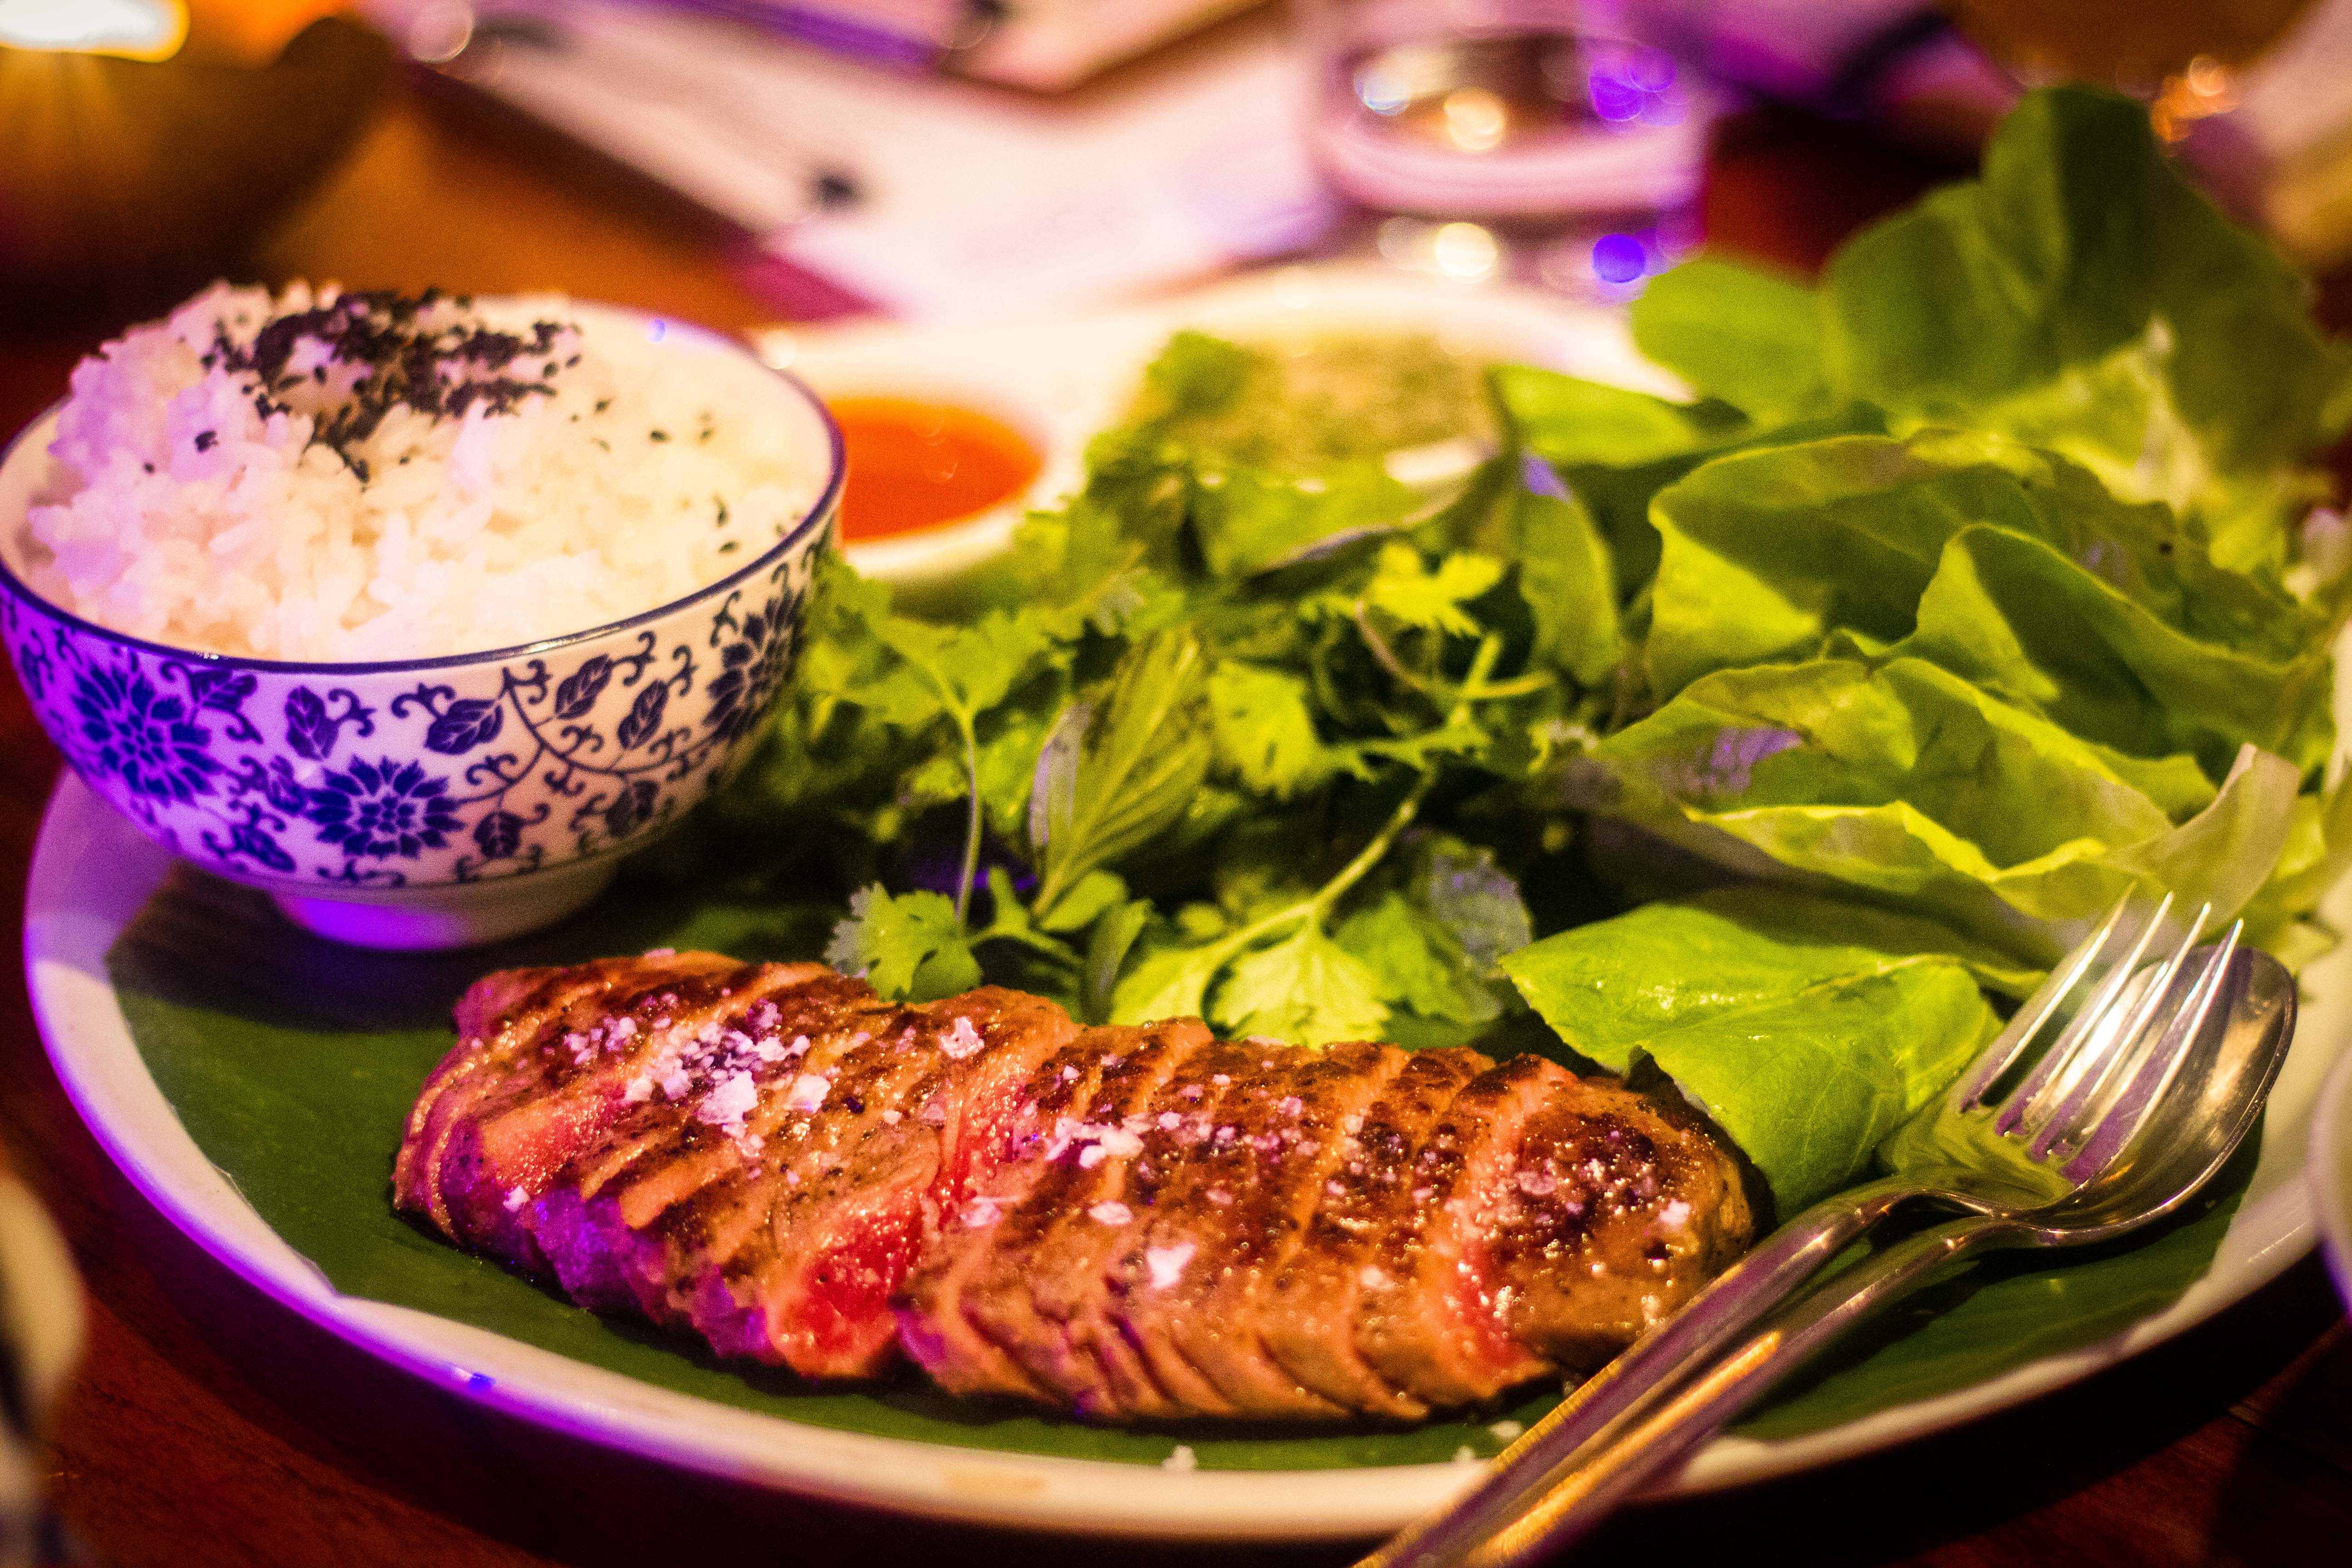 The PA Steak is a spread of nam pla-aged striploin that is served Ssam style with lettuce leaf wraps, fresh herbs and spicy Korean sauces. (Leo Jackson)